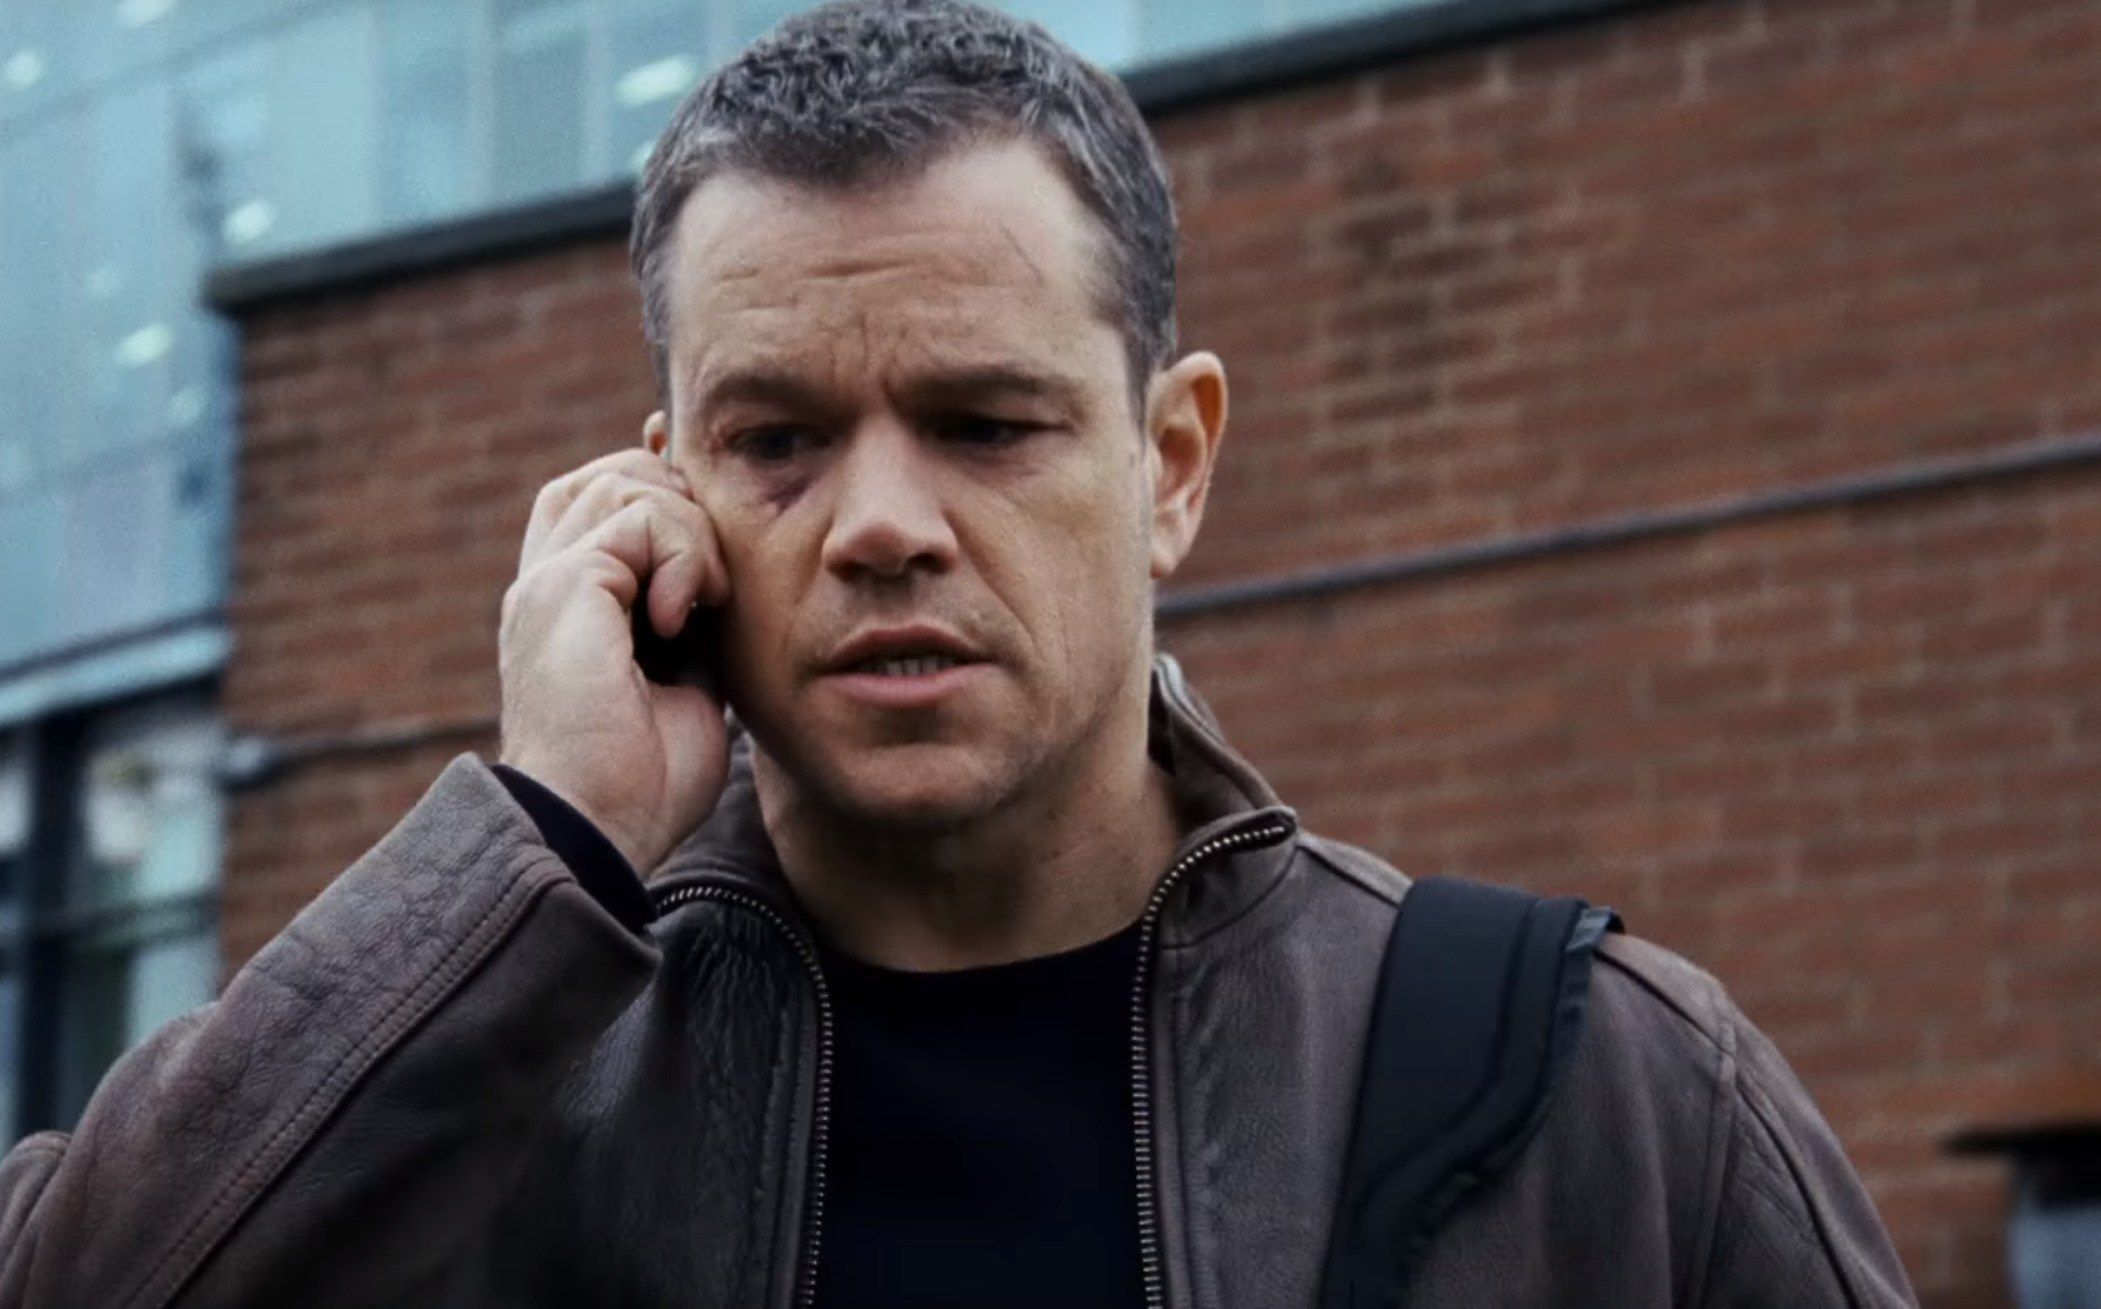 Bourne Producer Says He Hopes To Restart The Series Soon